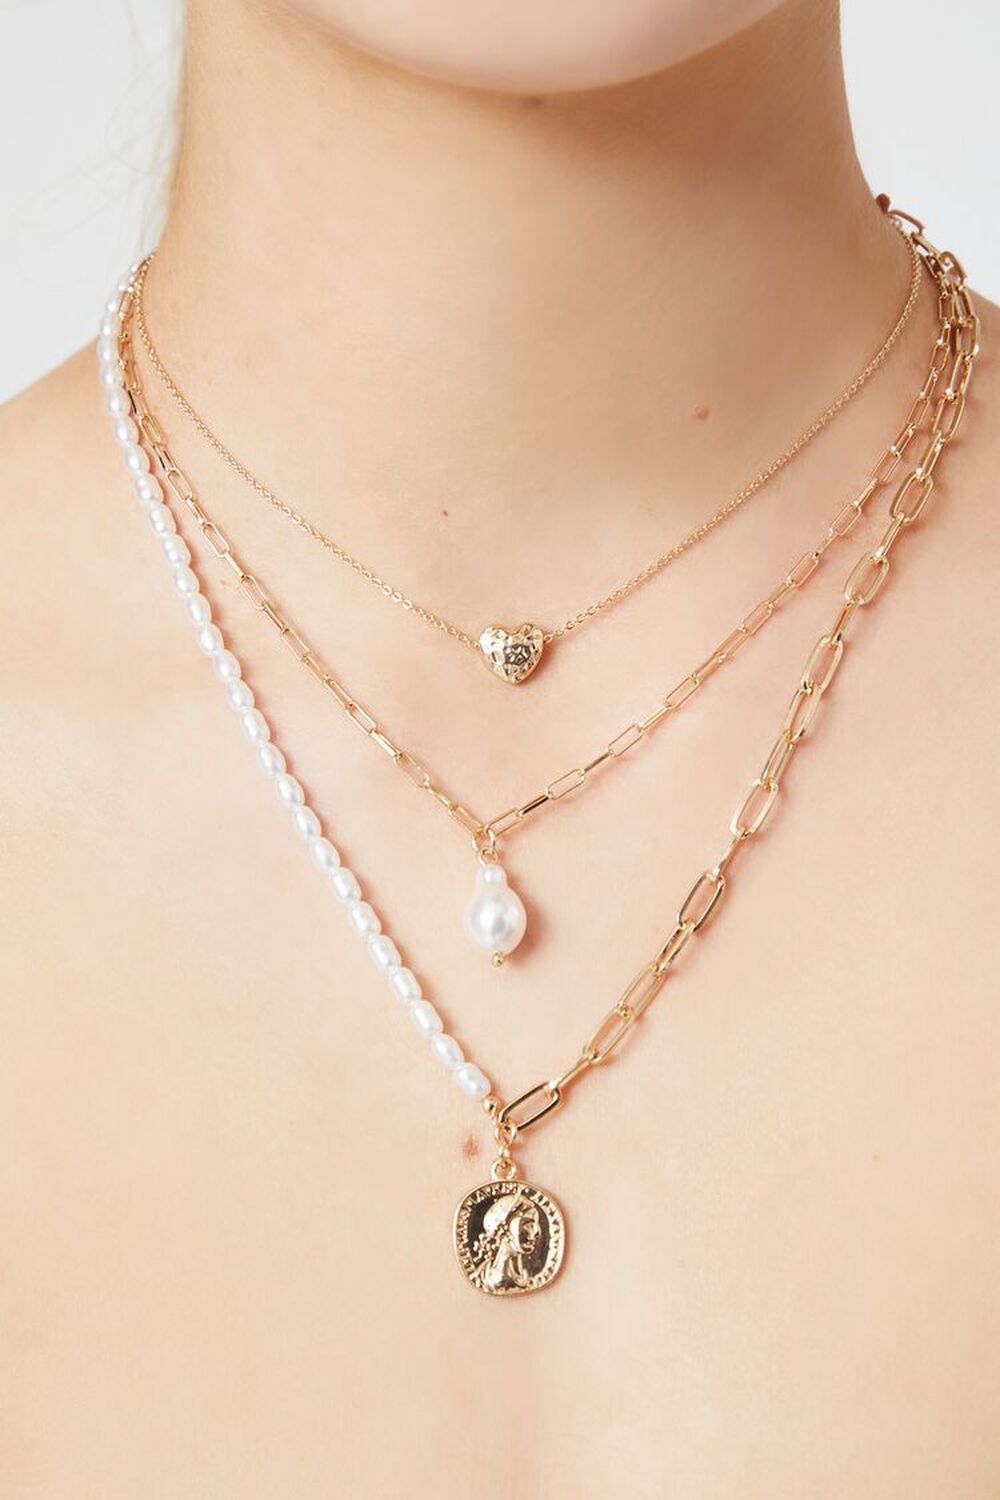 Forever 21 Women's Layered Faux Pearl Charm Necklace in Gold/White | F21